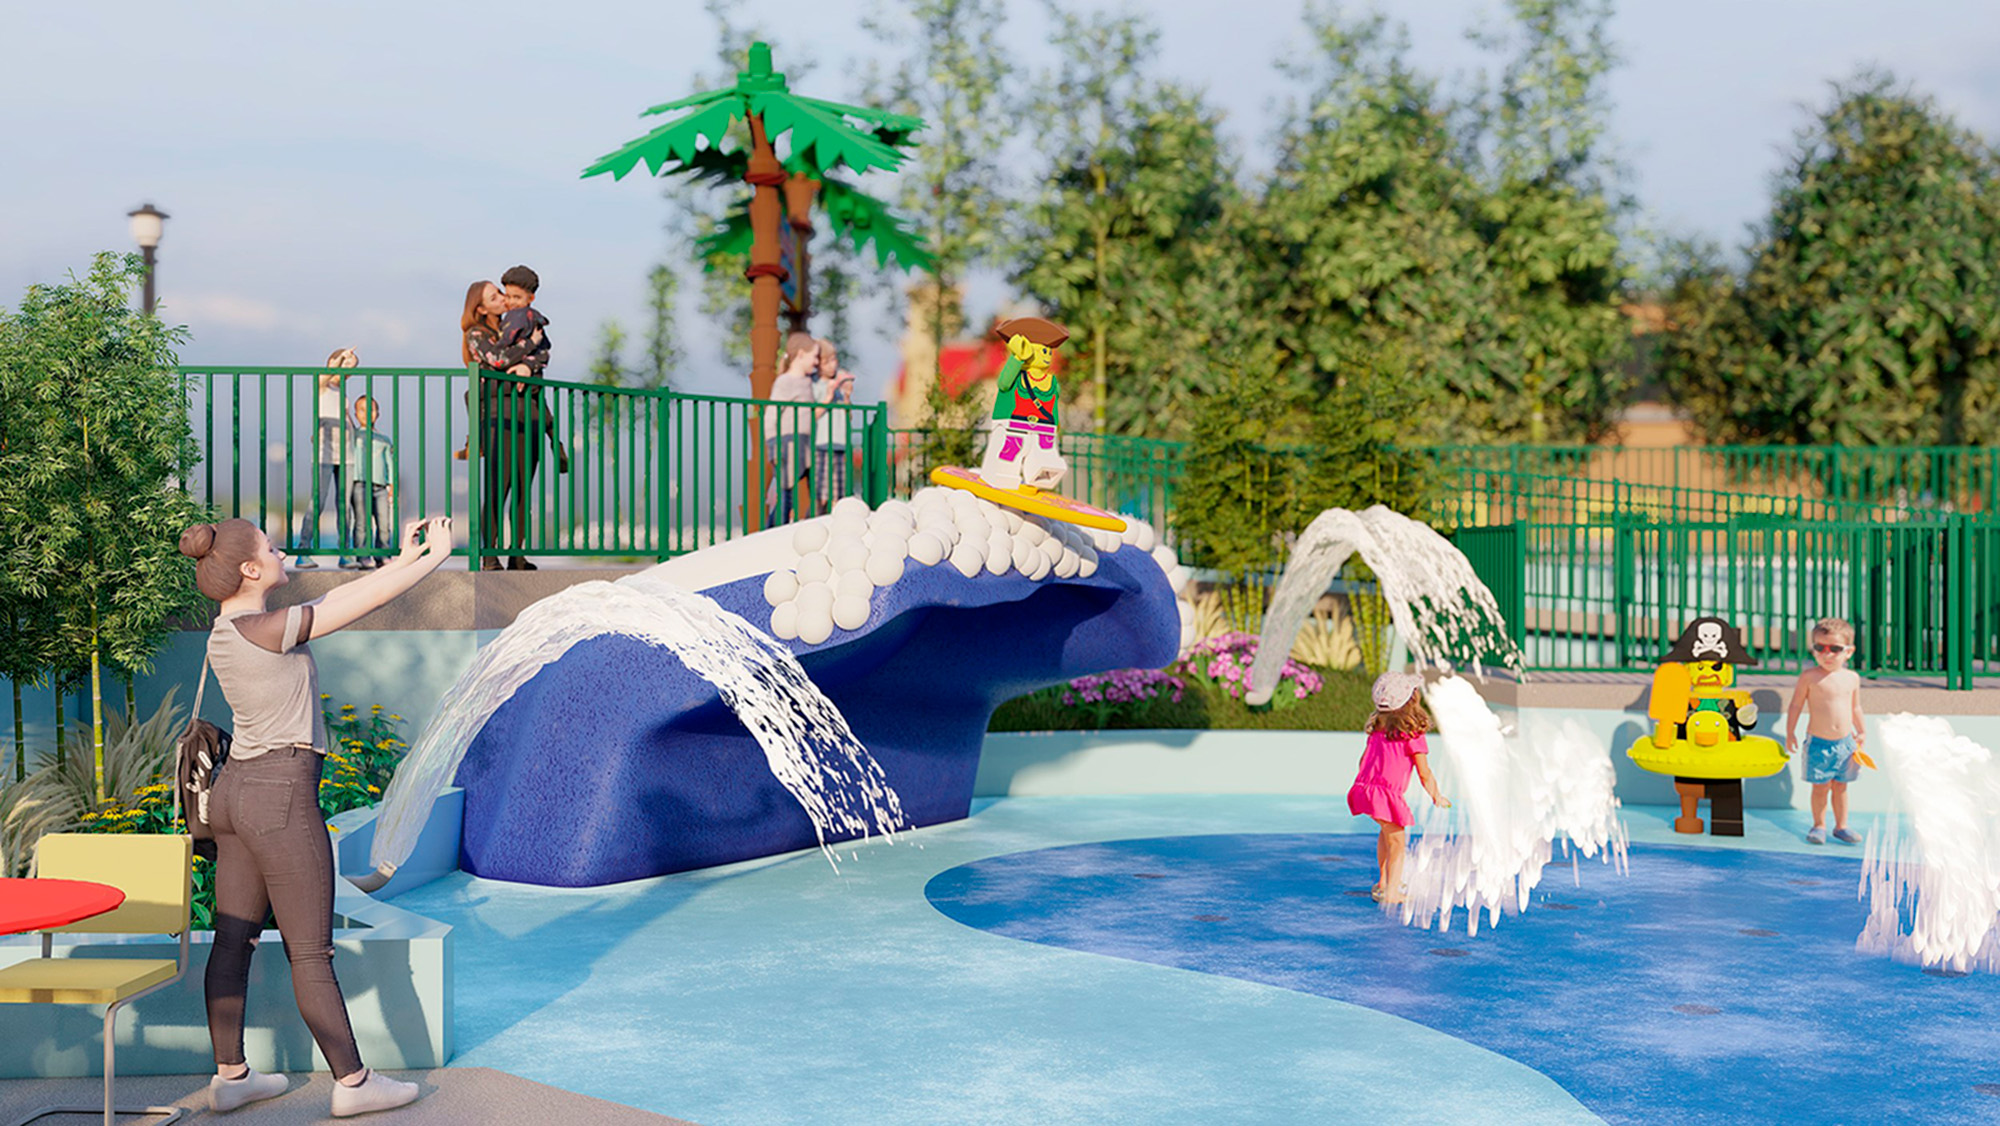 LEGOLAND New York Resort's waves and palm trees